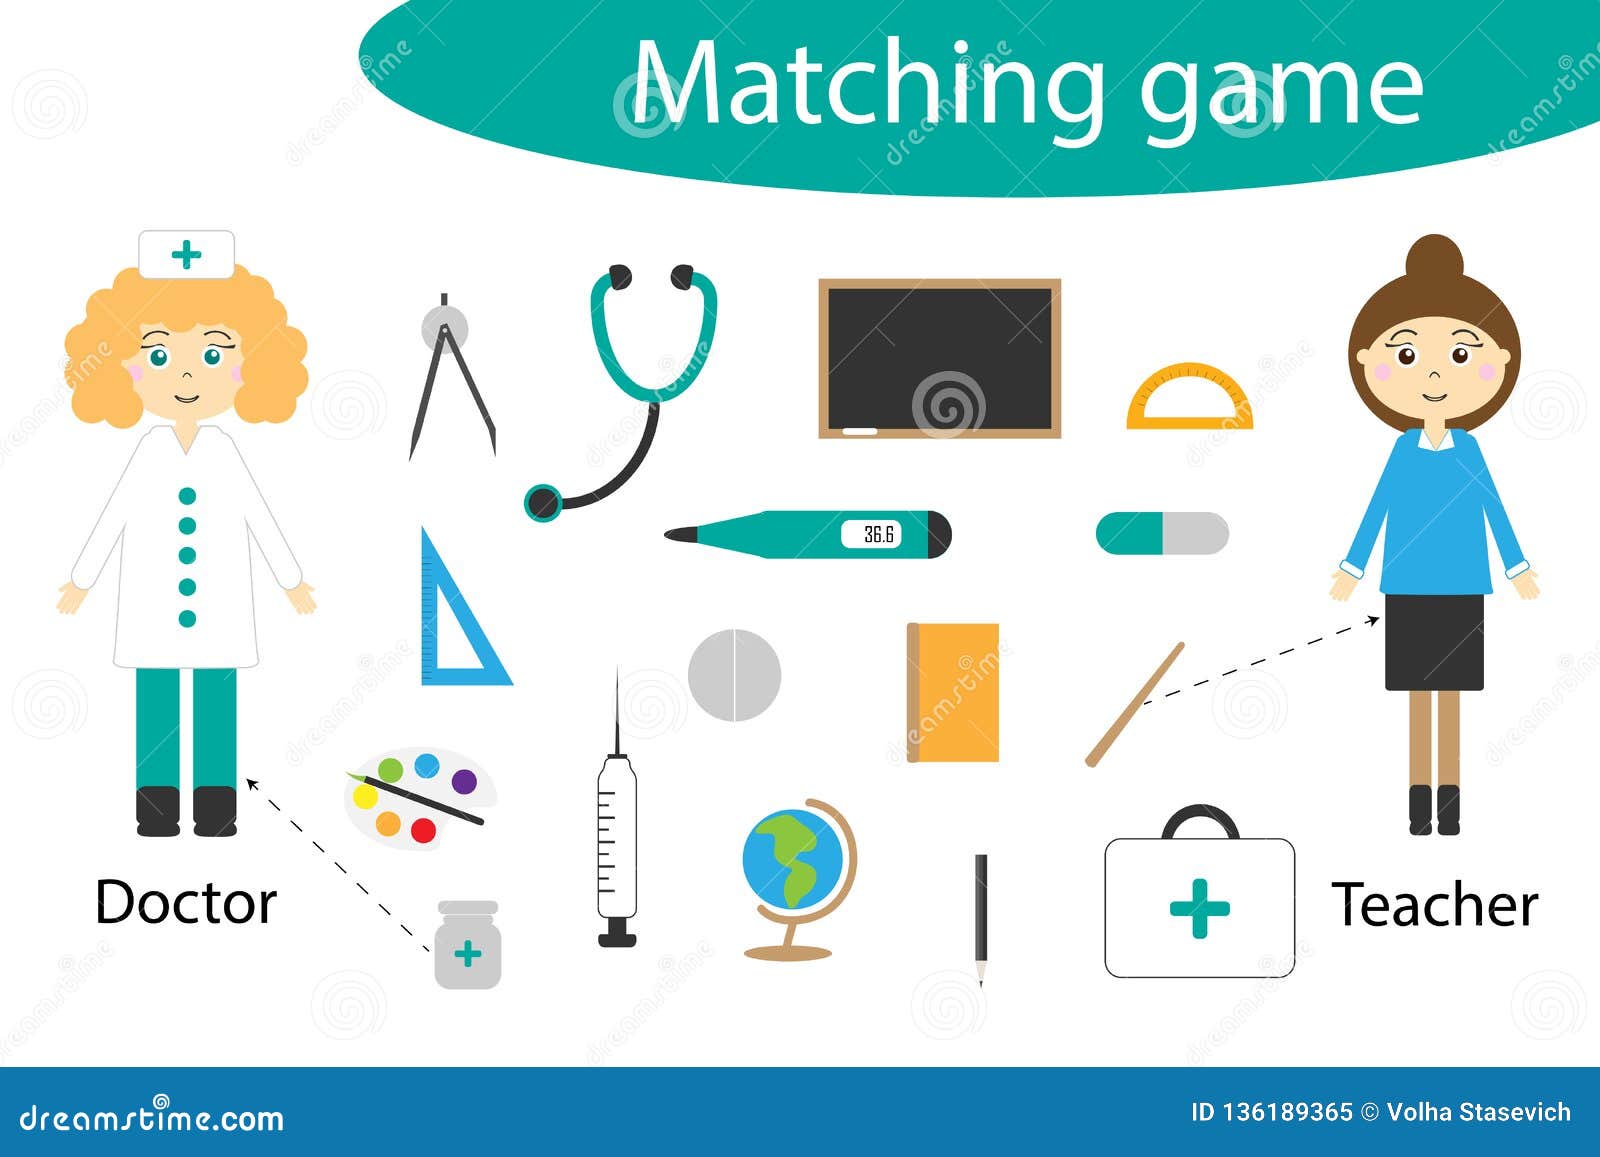 profession-matching-game-for-children-connect-things-with-need